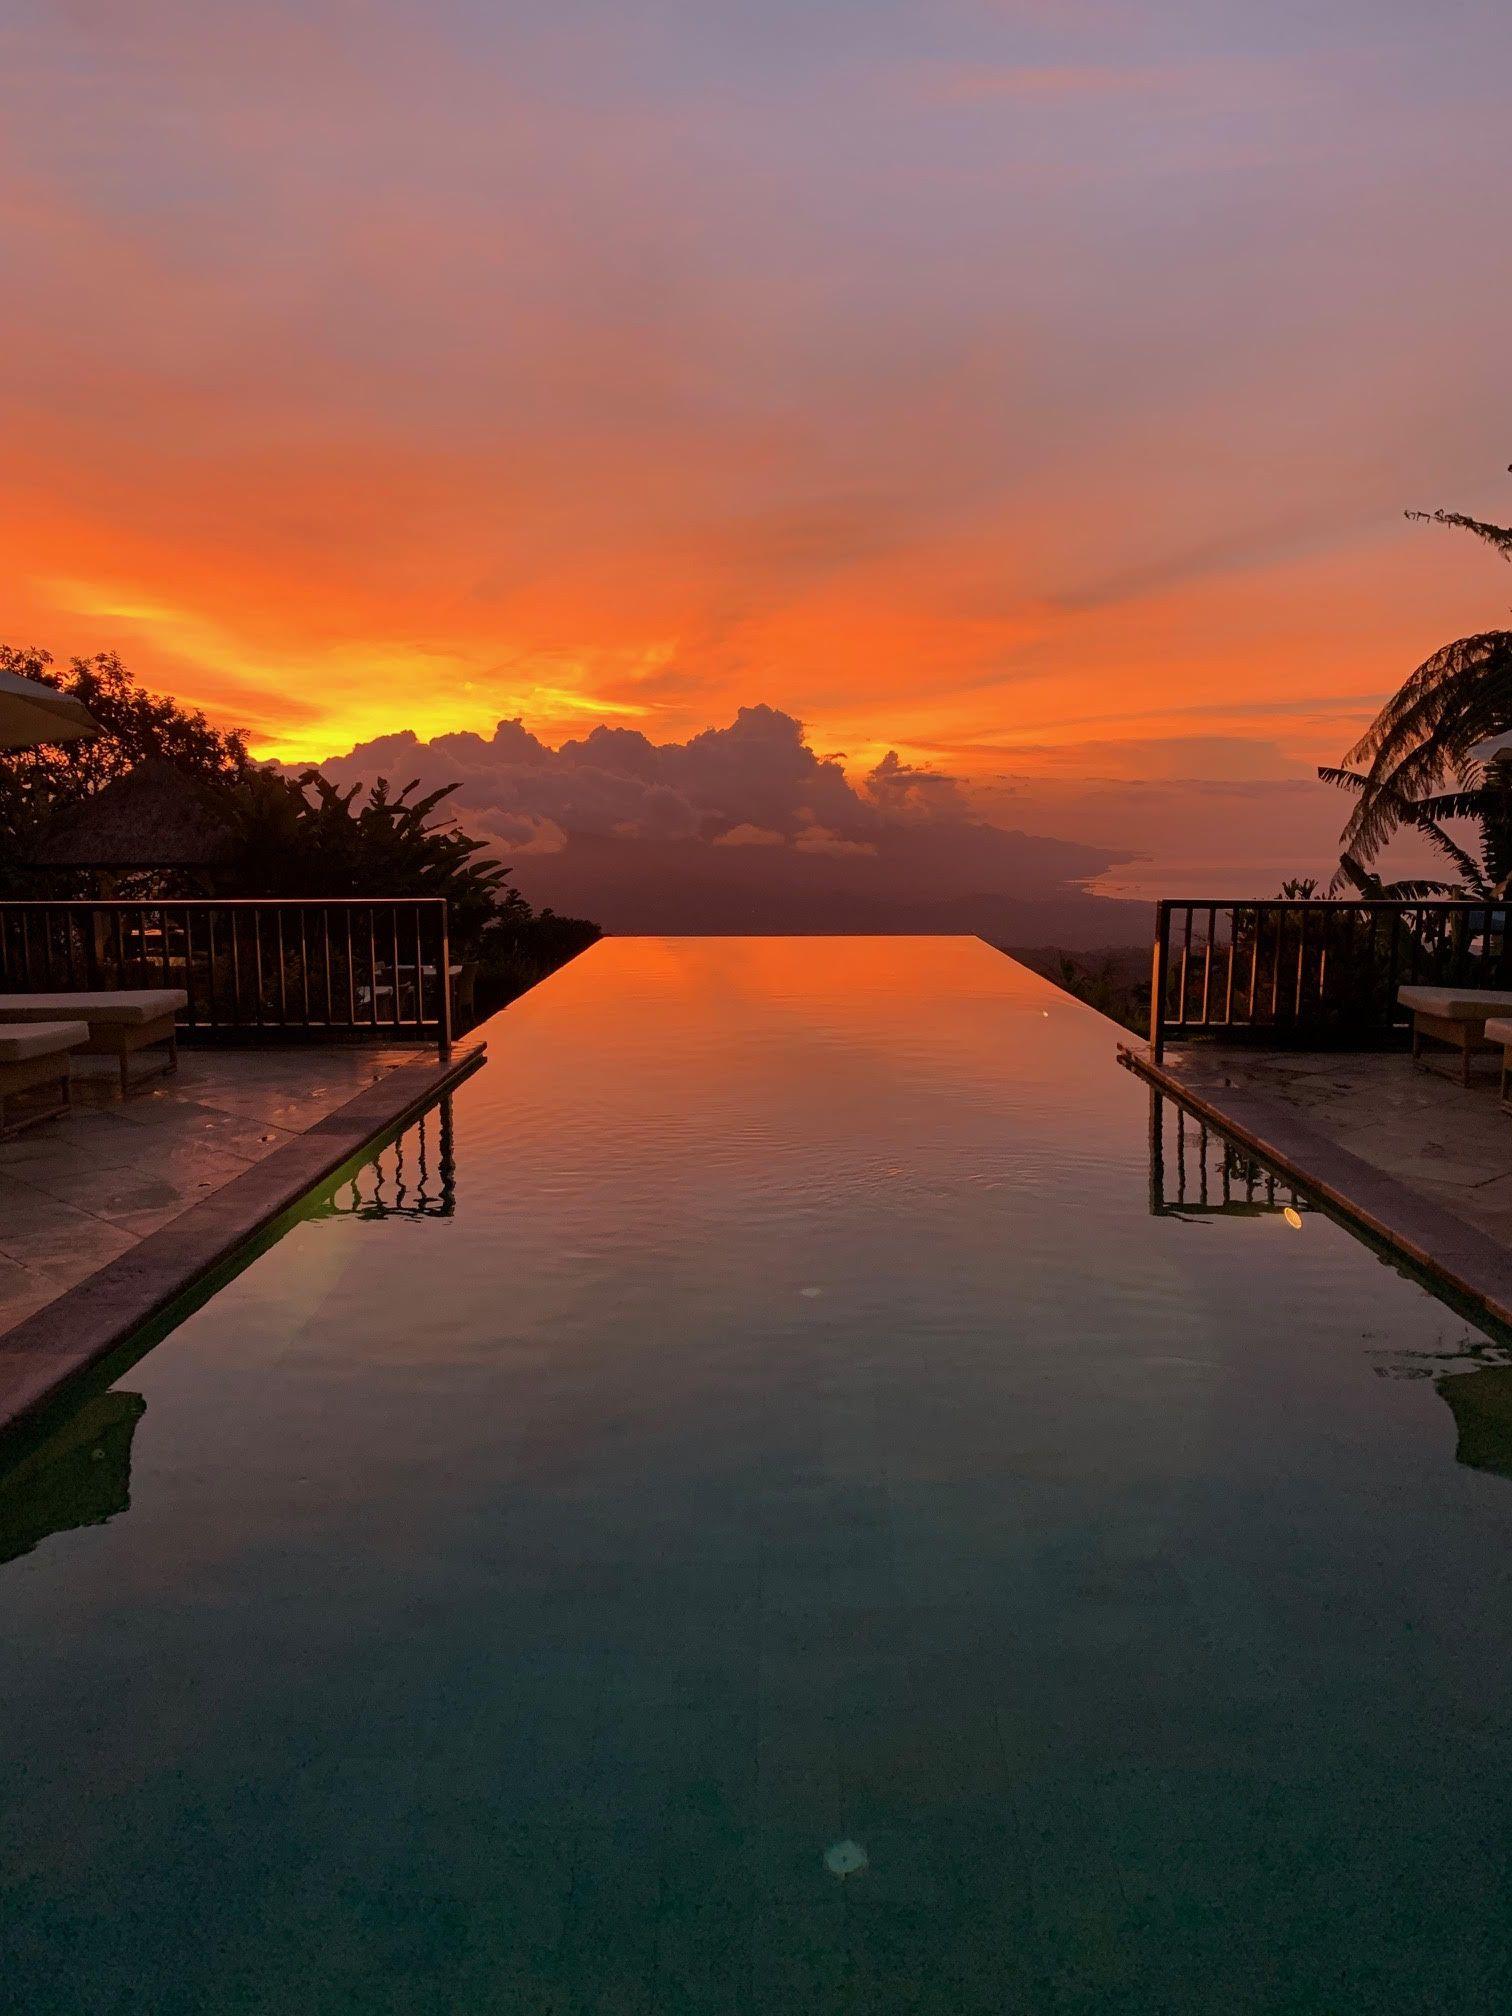 The Infinity Pool site is perfect to enjoy beautiful sunsets #sunset